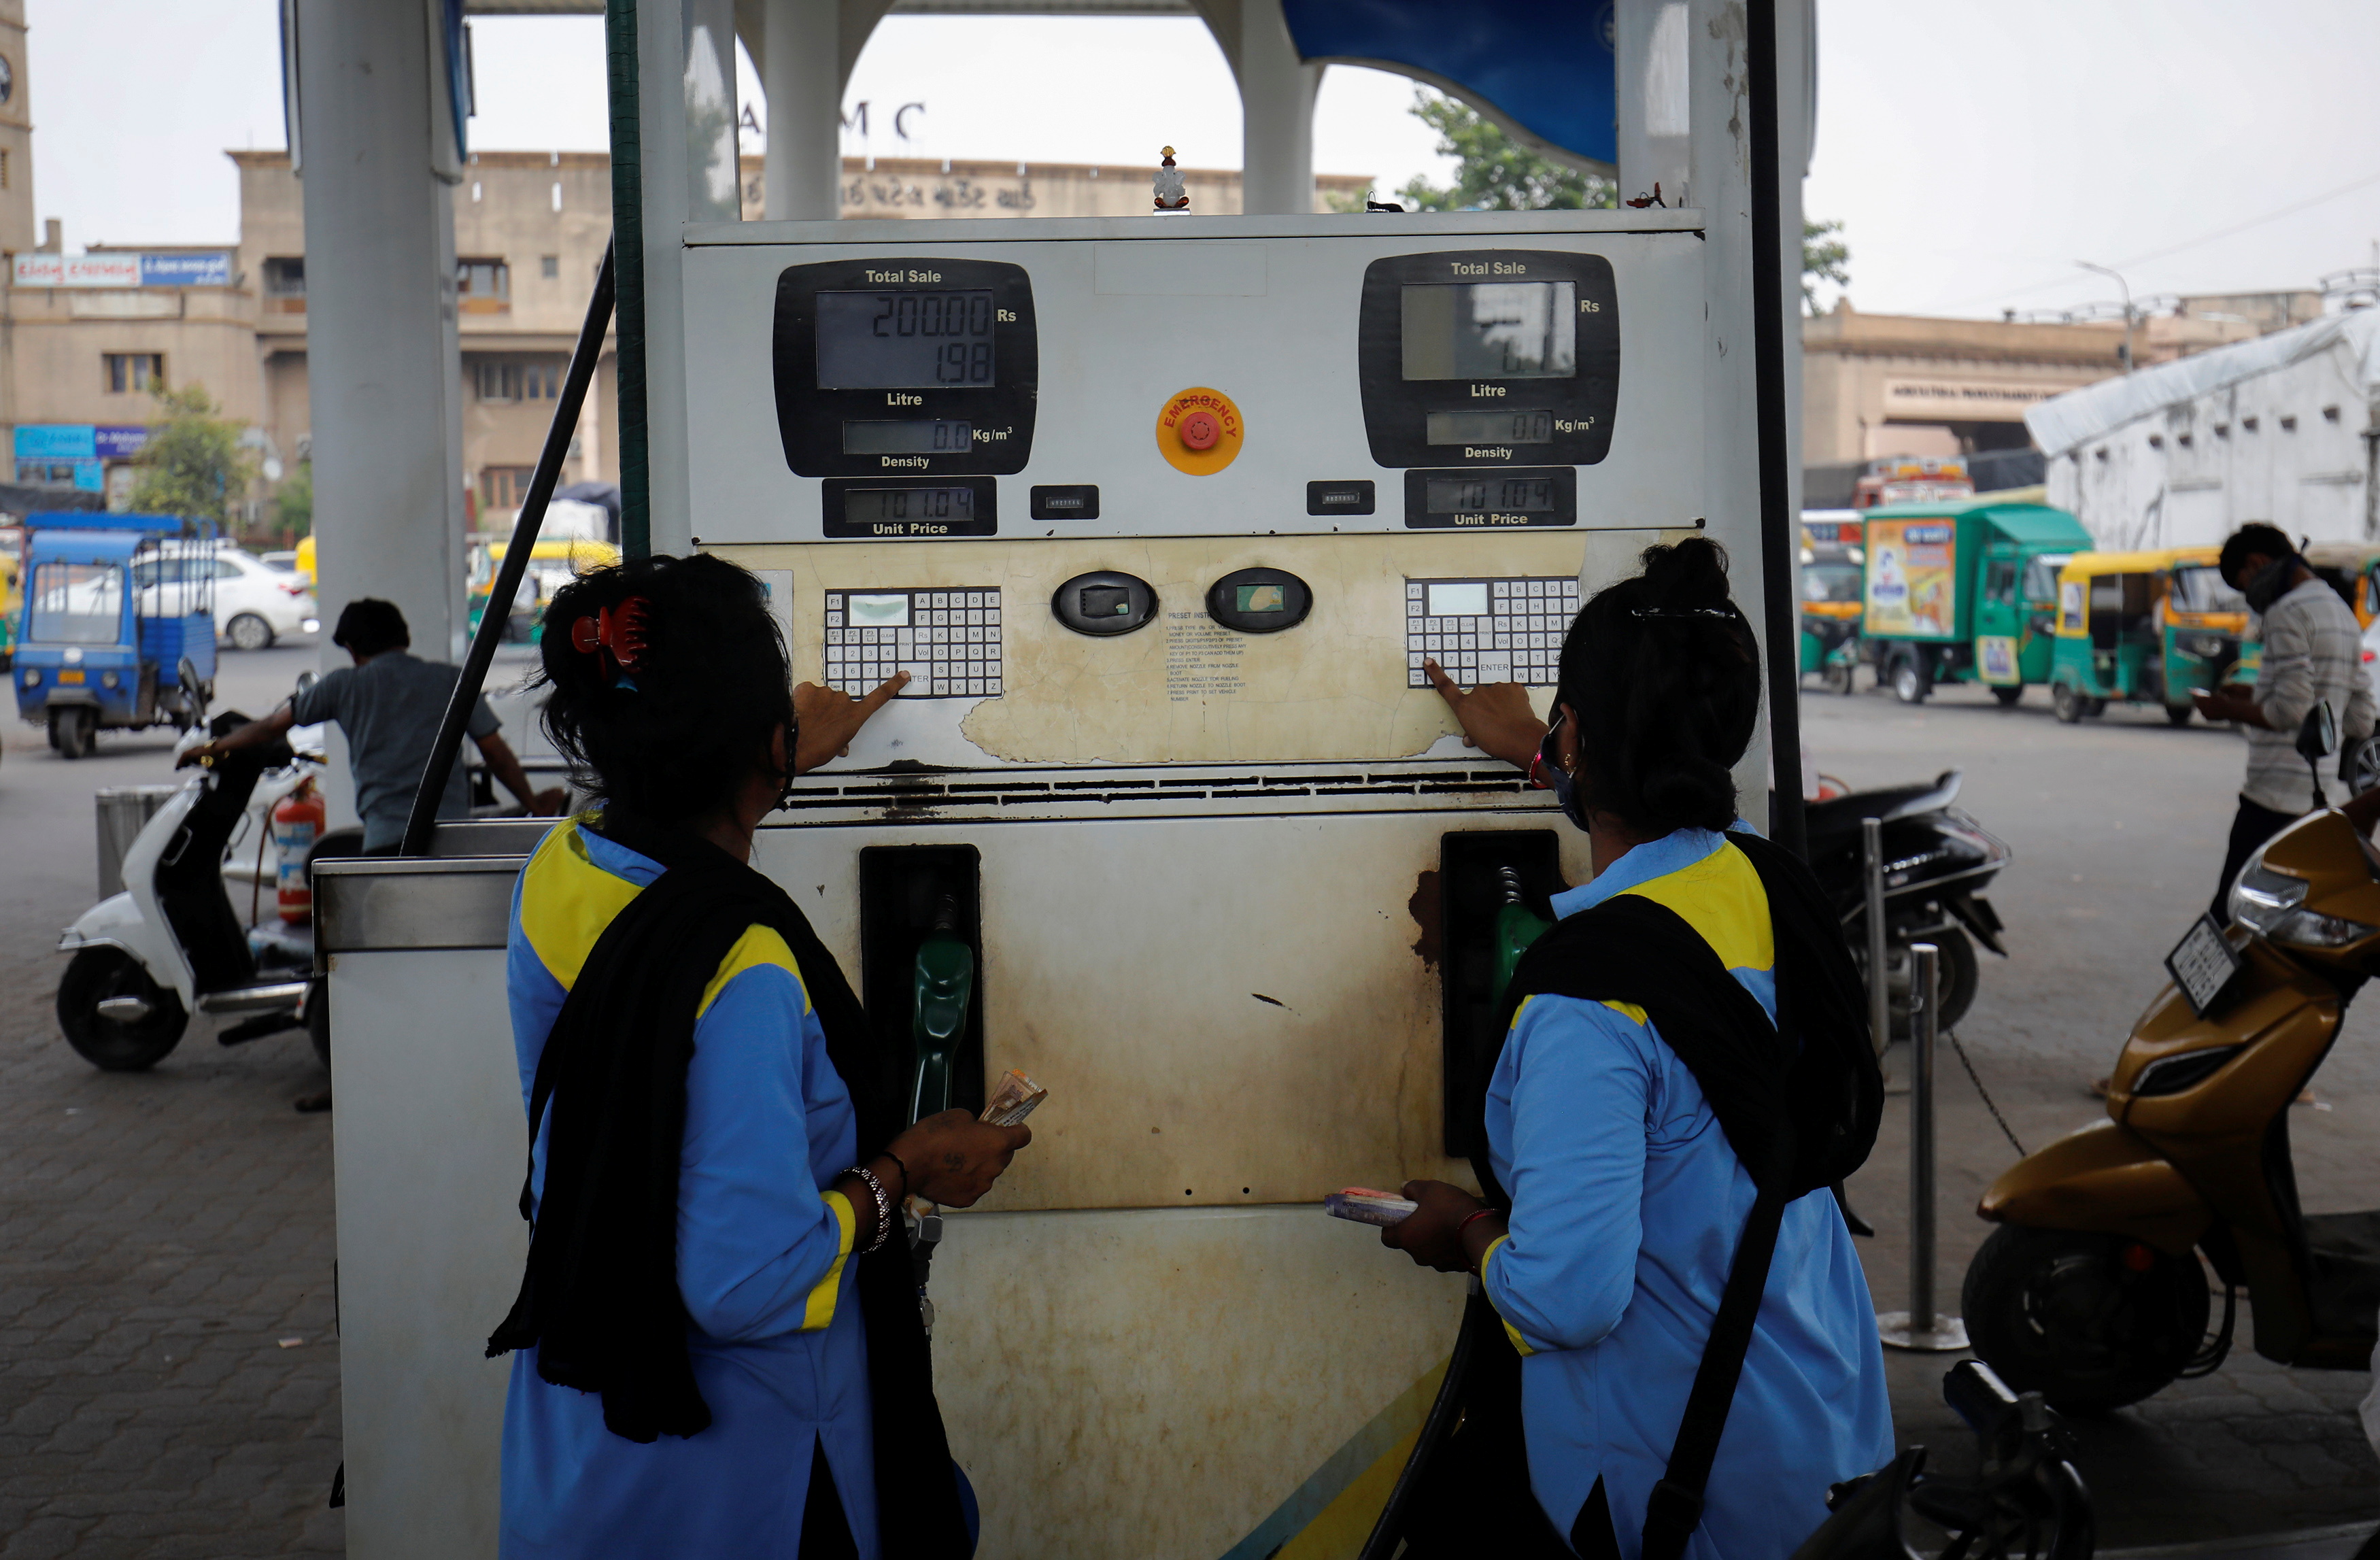 Workers pump fuel at a petrol station in Ahmedabad